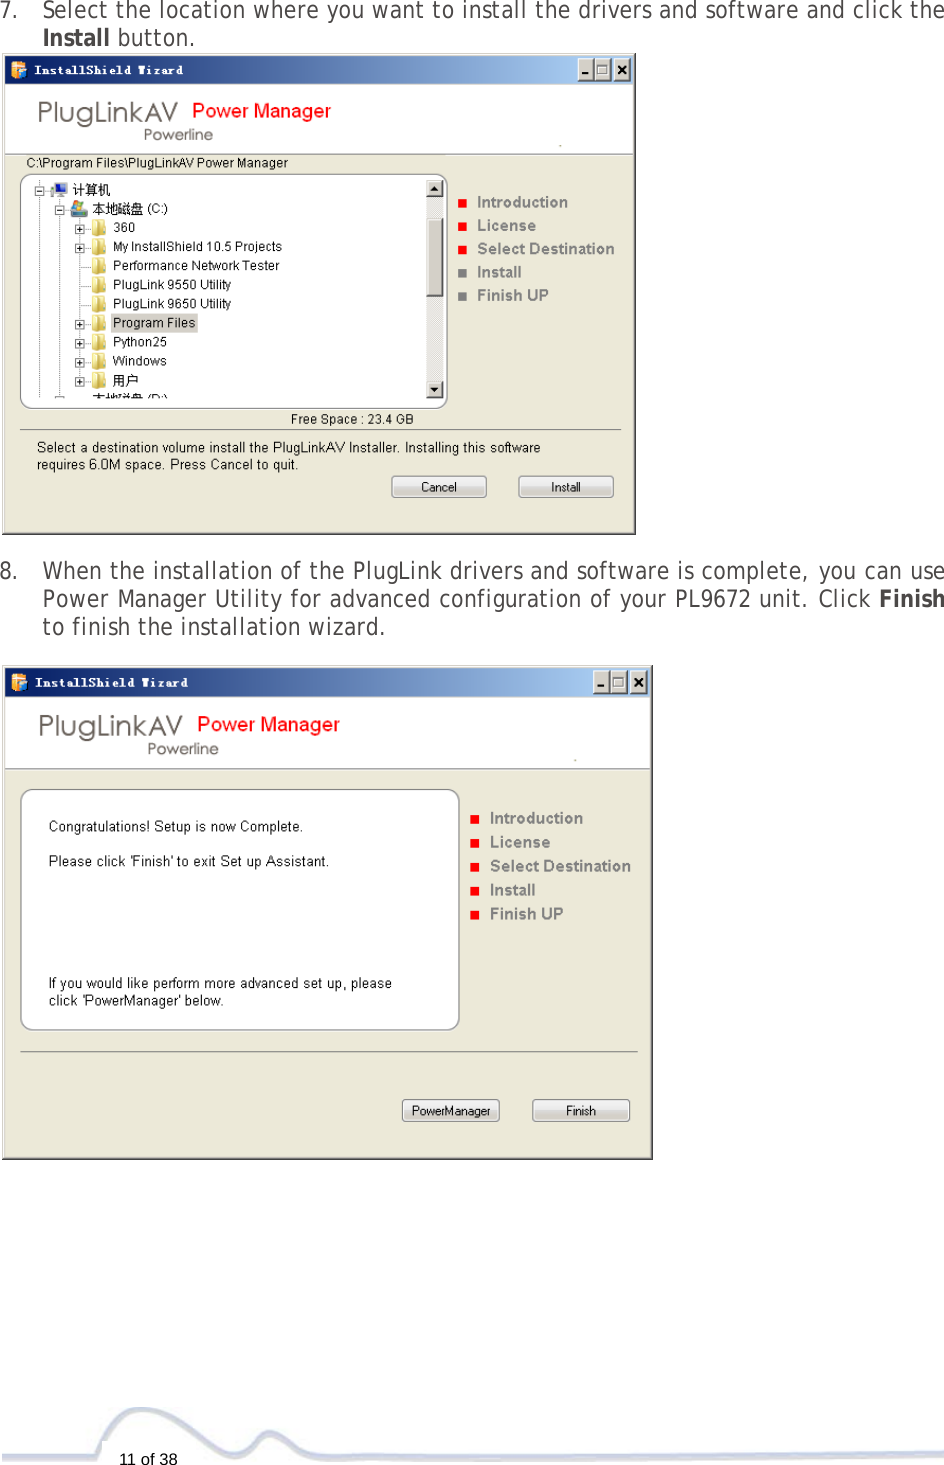  11 of 38  7. Select the location where you want to install the drivers and software and click the Install button.   8. When the installation of the PlugLink drivers and software is complete, you can use Power Manager Utility for advanced configuration of your PL9672 unit. Click Finish to finish the installation wizard.   